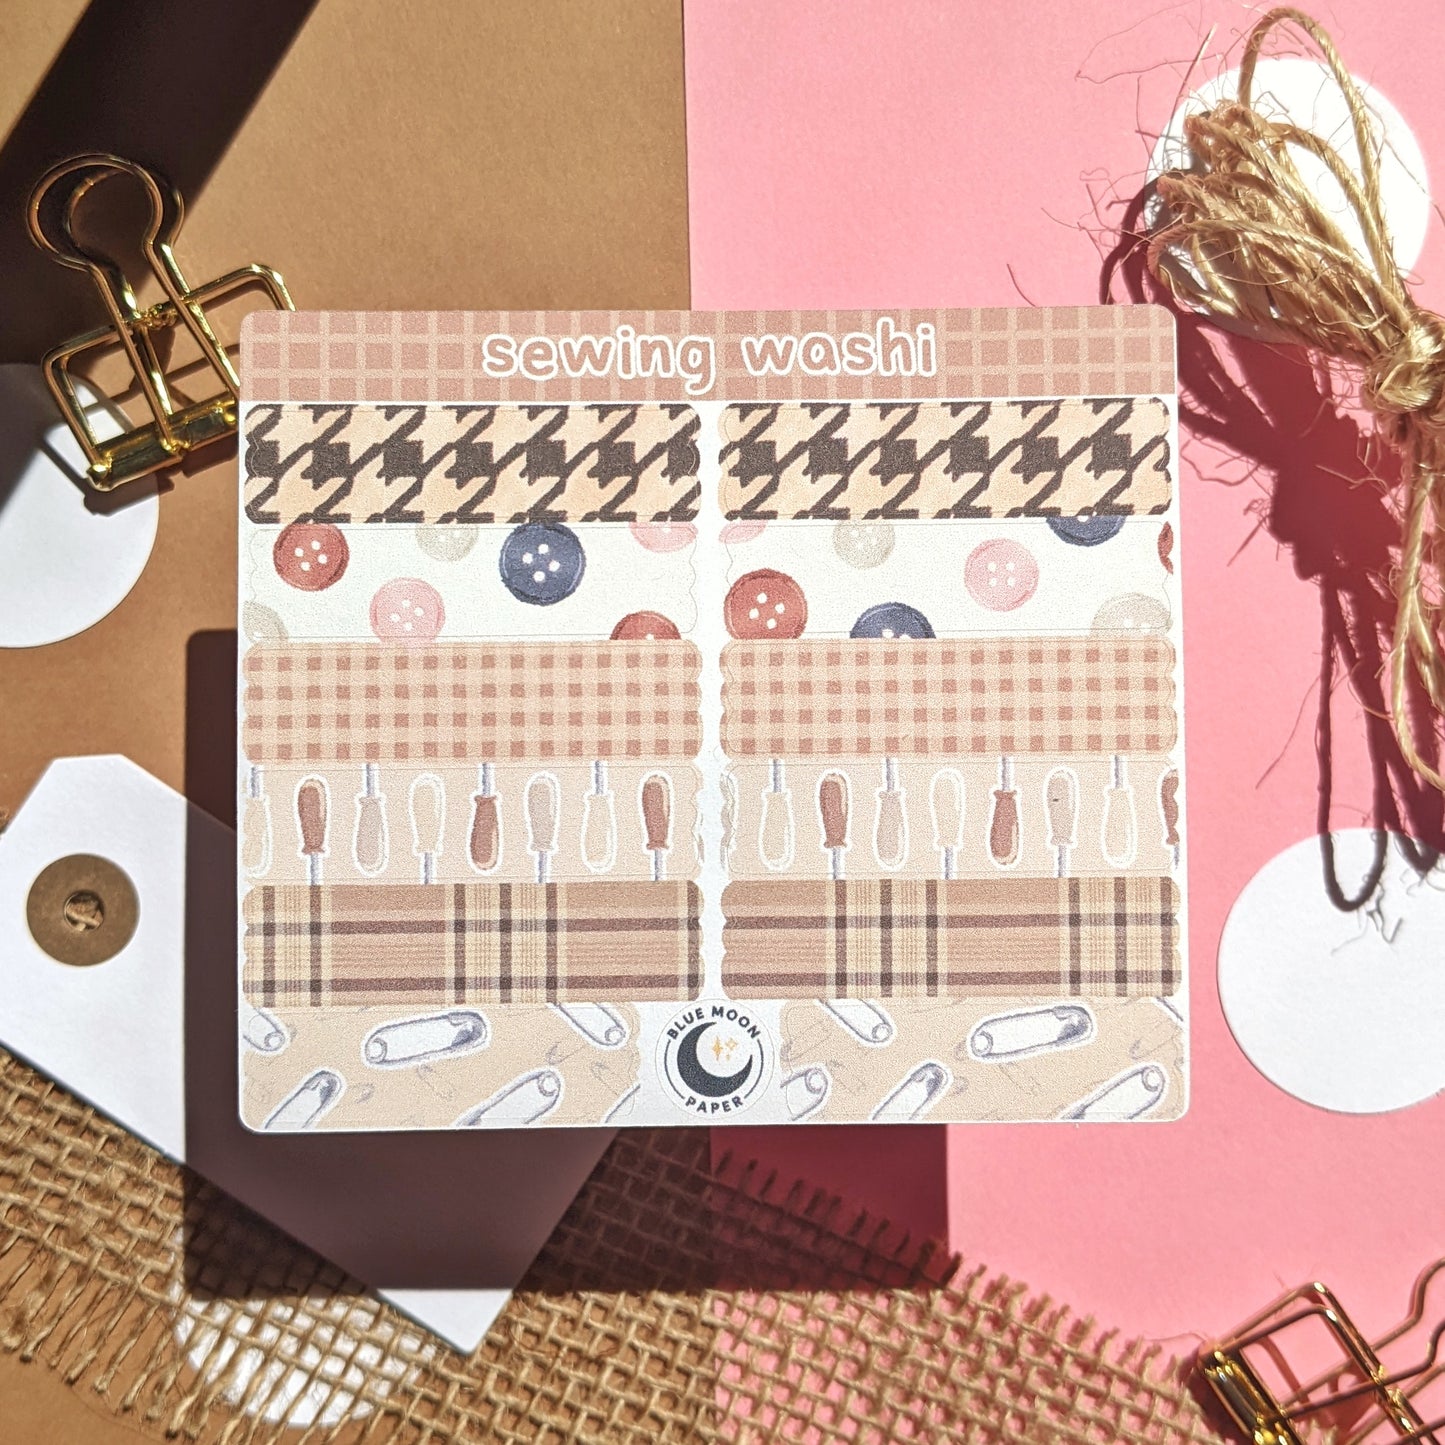 Sticker sheet featuring rectangles with illustrated patterns such as houndstooth, plaid, and gingham.